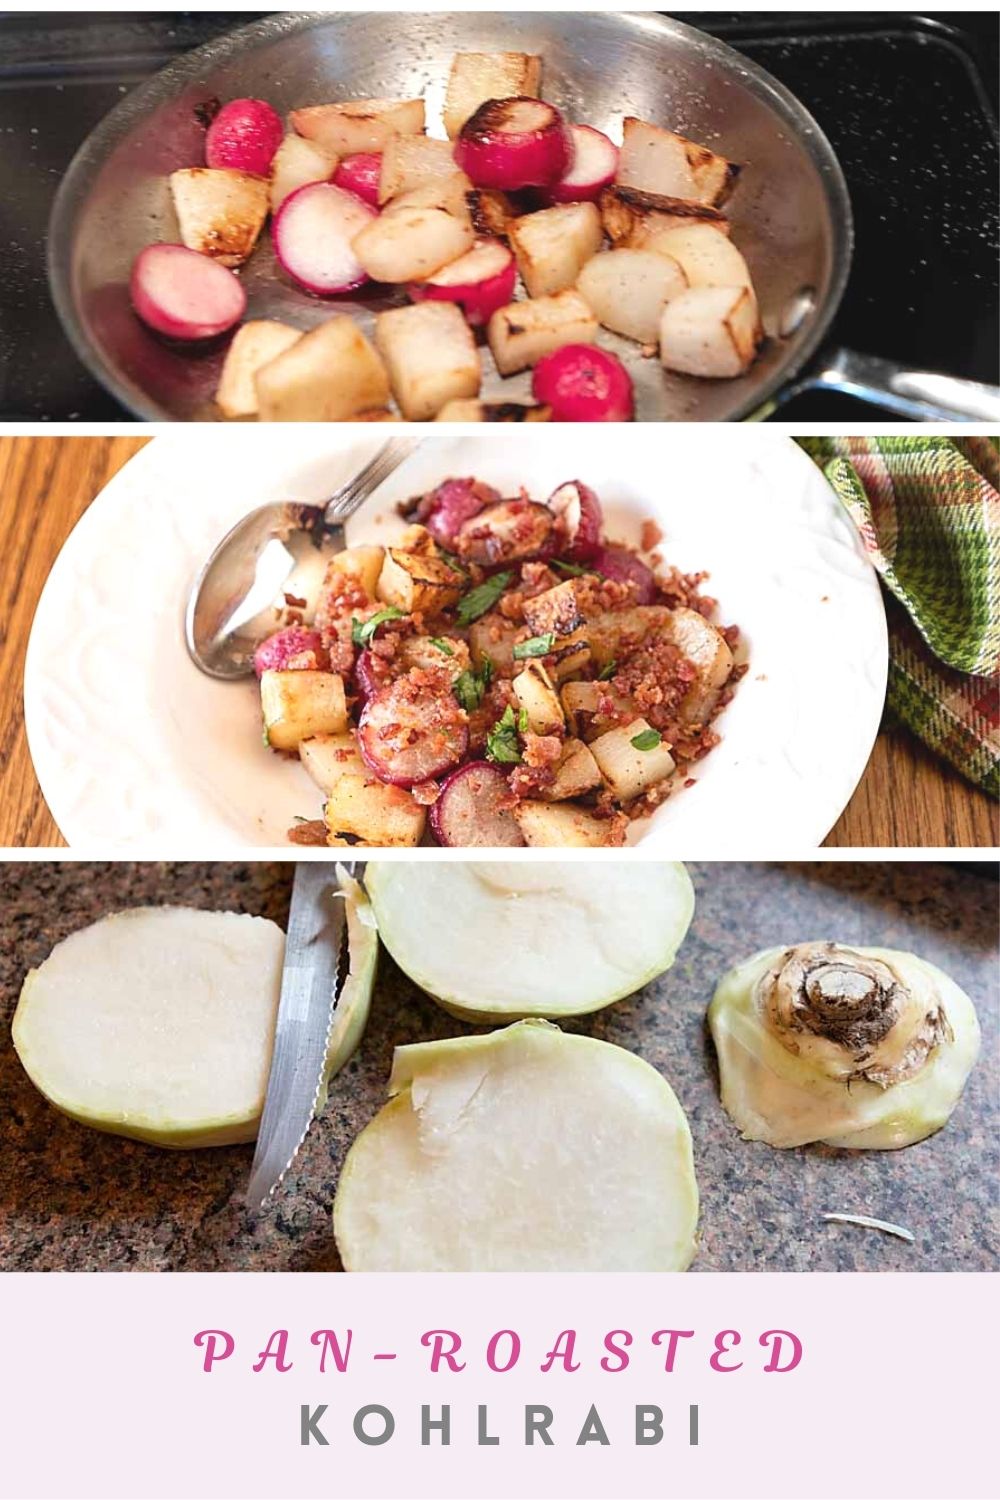 Caramelized and mellow, with a hint of smokey bacon, Pan Roasted Kohlrabi and Radishes is quick, easy, and won't heat up the kitchen!